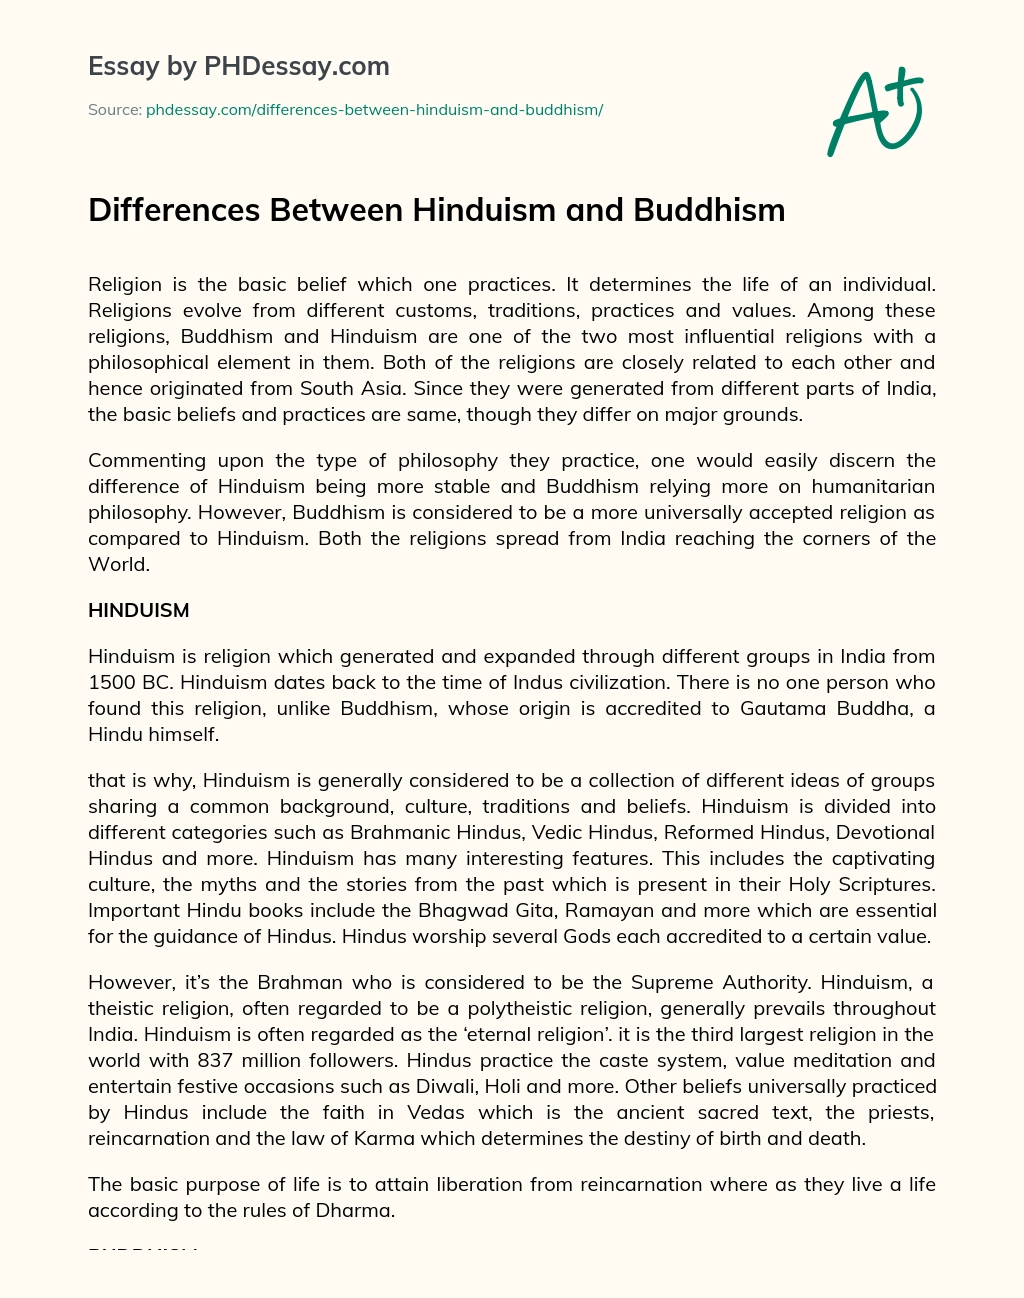 Differences Between Hinduism and Buddhism essay